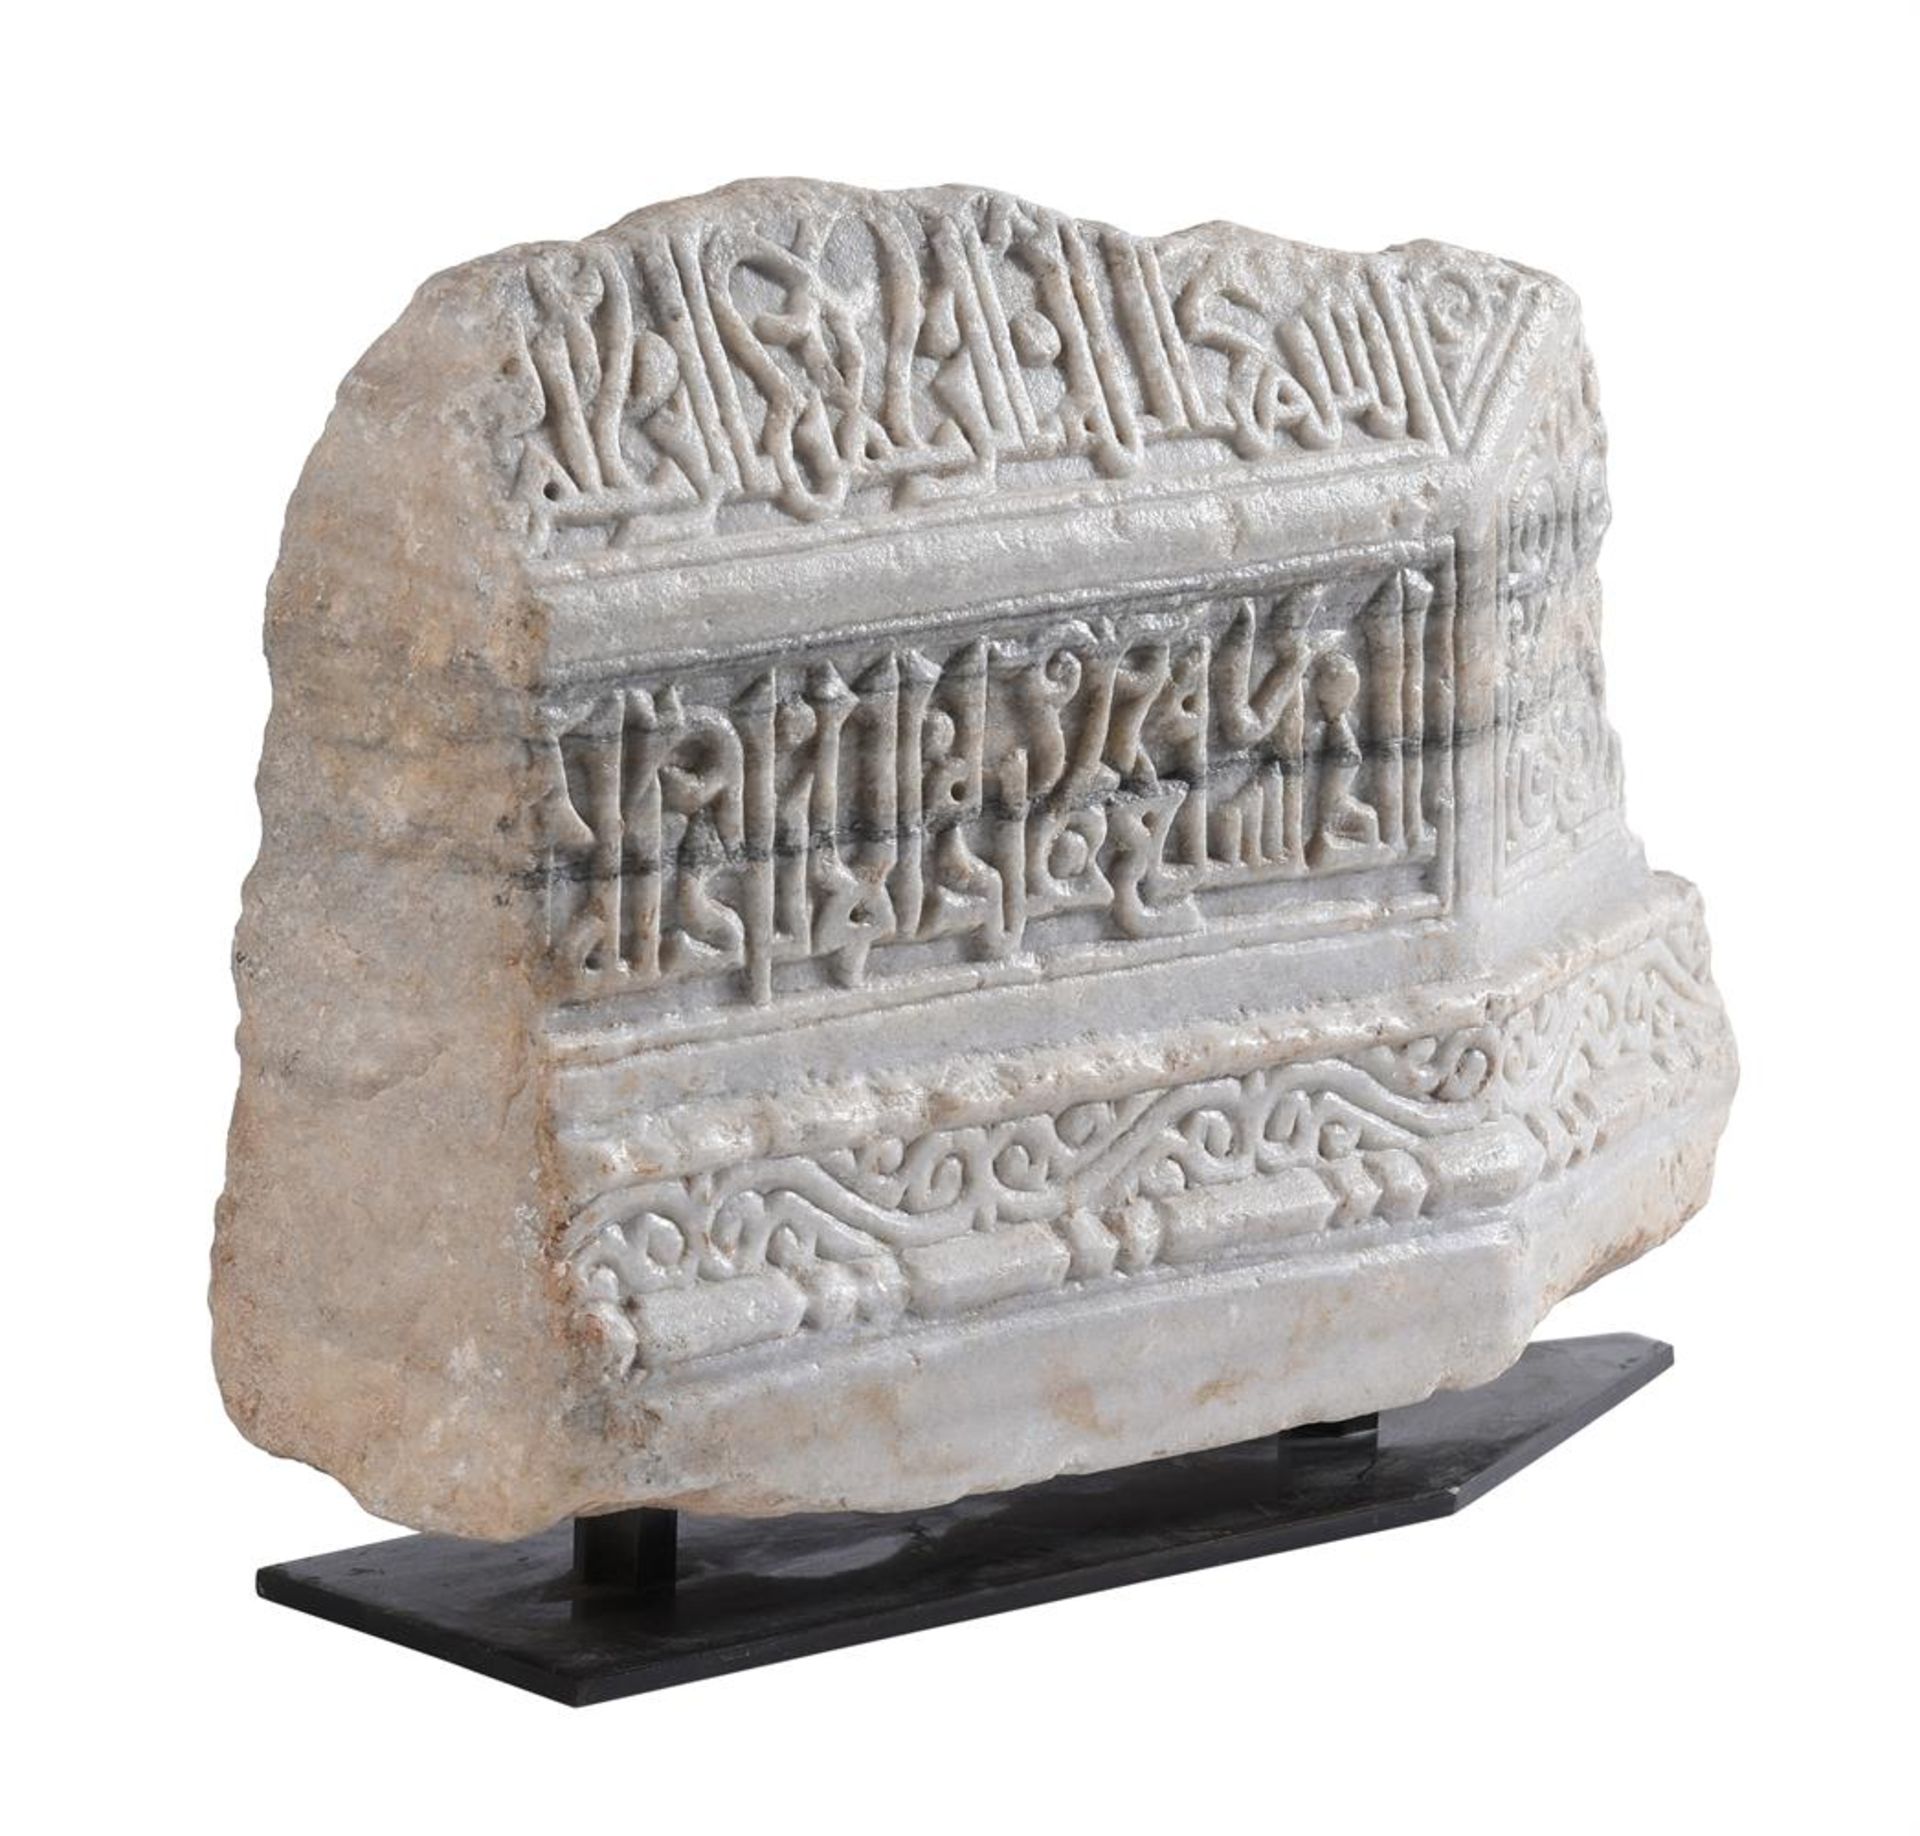 A FRAGMENTARY MARBLE FUNERARY MONUMENT NORTH AFRICA - Image 2 of 3